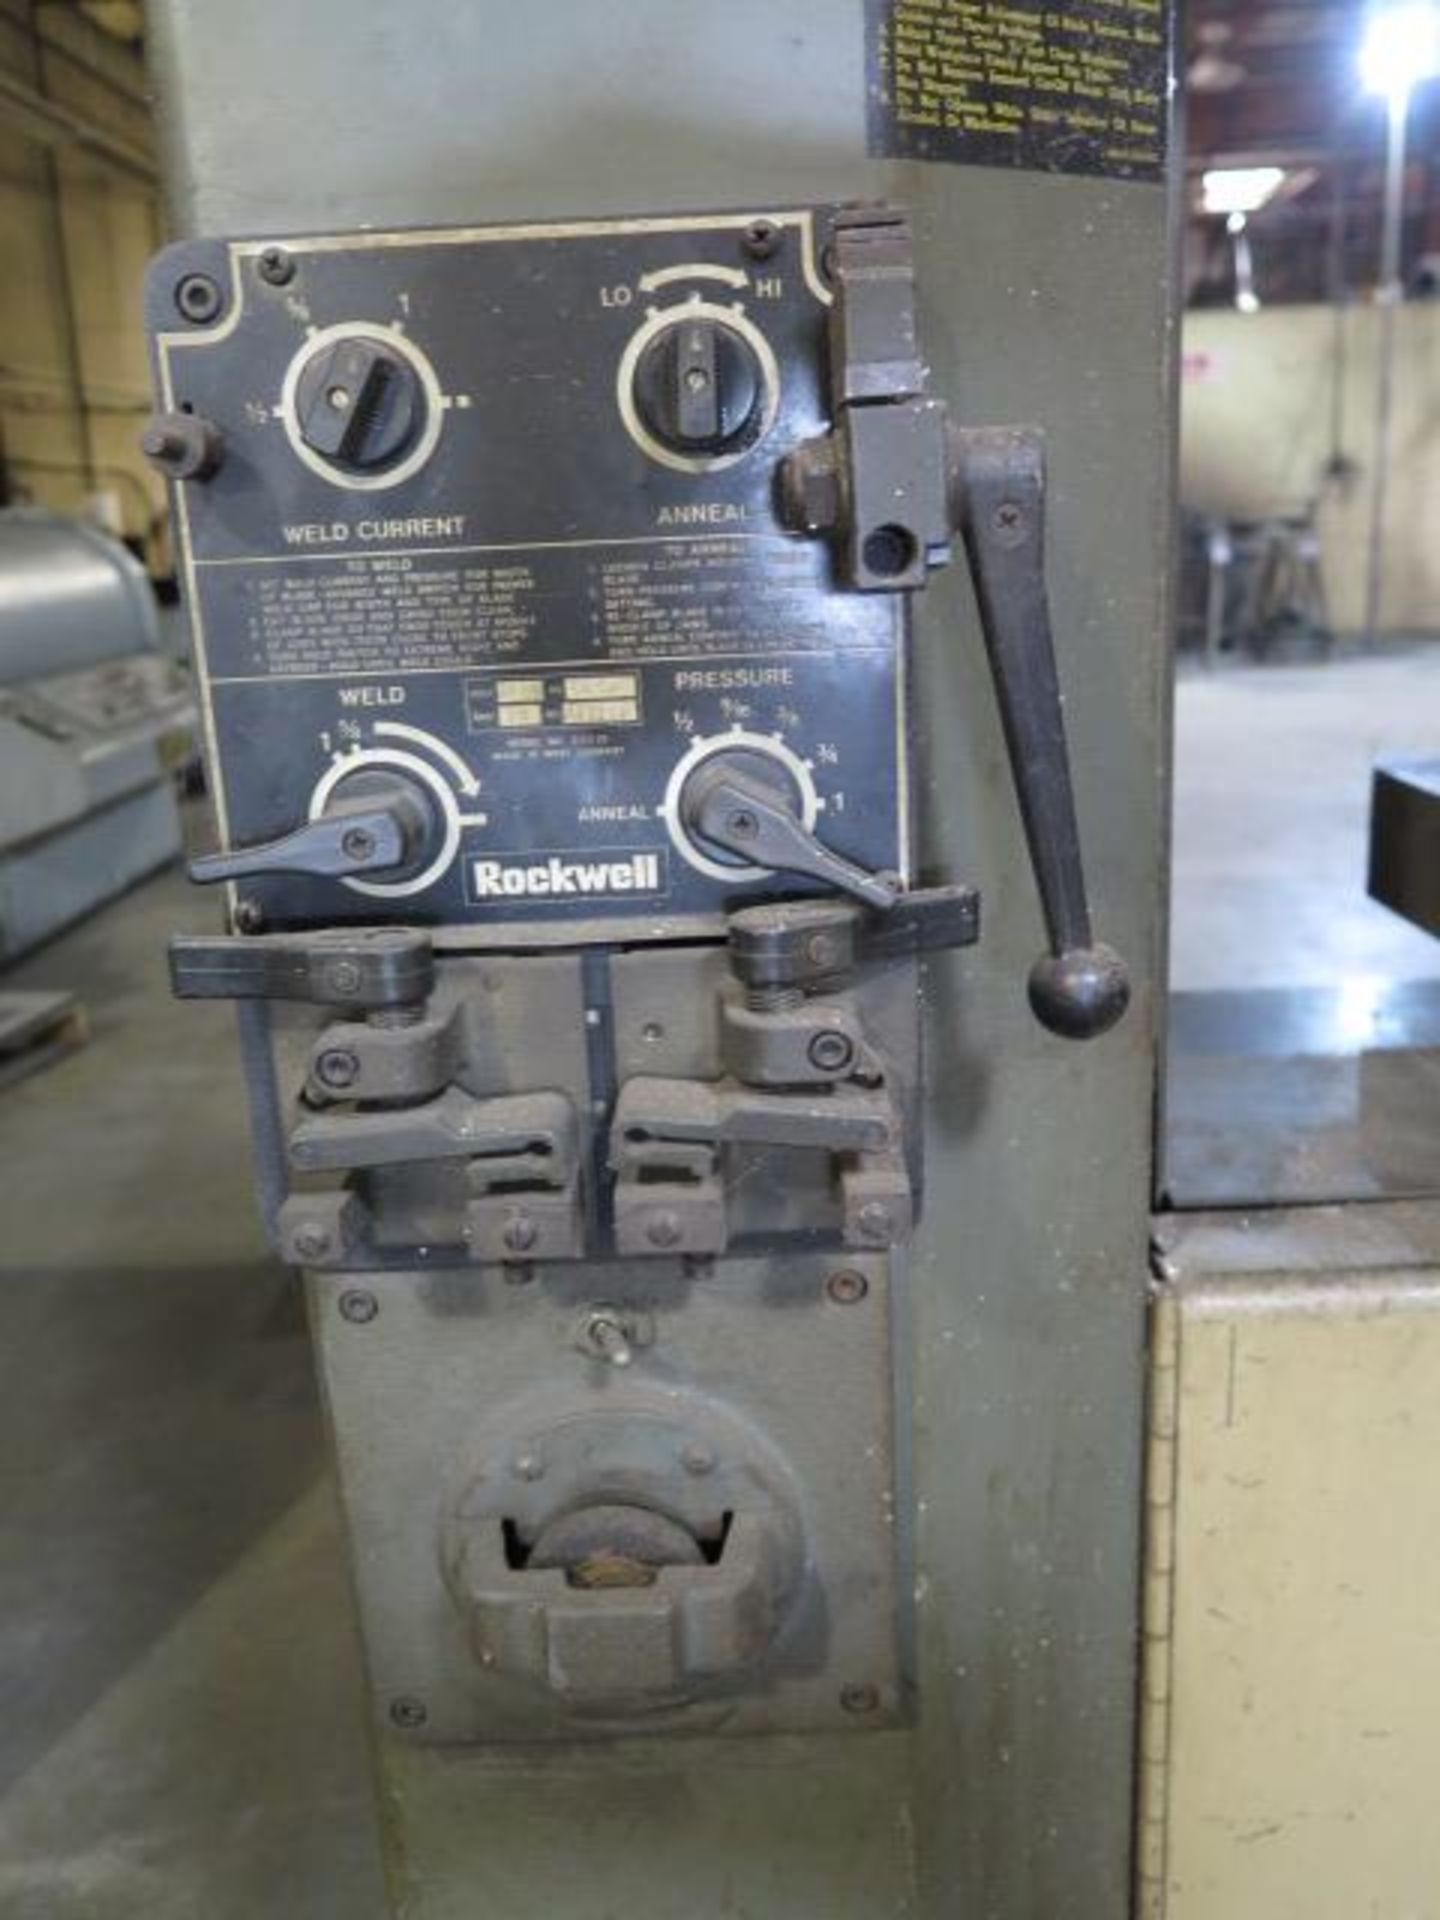 Rockwell 20” Vertical Band Saw s/n 1814408 w/ Blade Welder, 50-4500 FPM, 24” x 24” Table,SOLD AS IS - Image 6 of 7